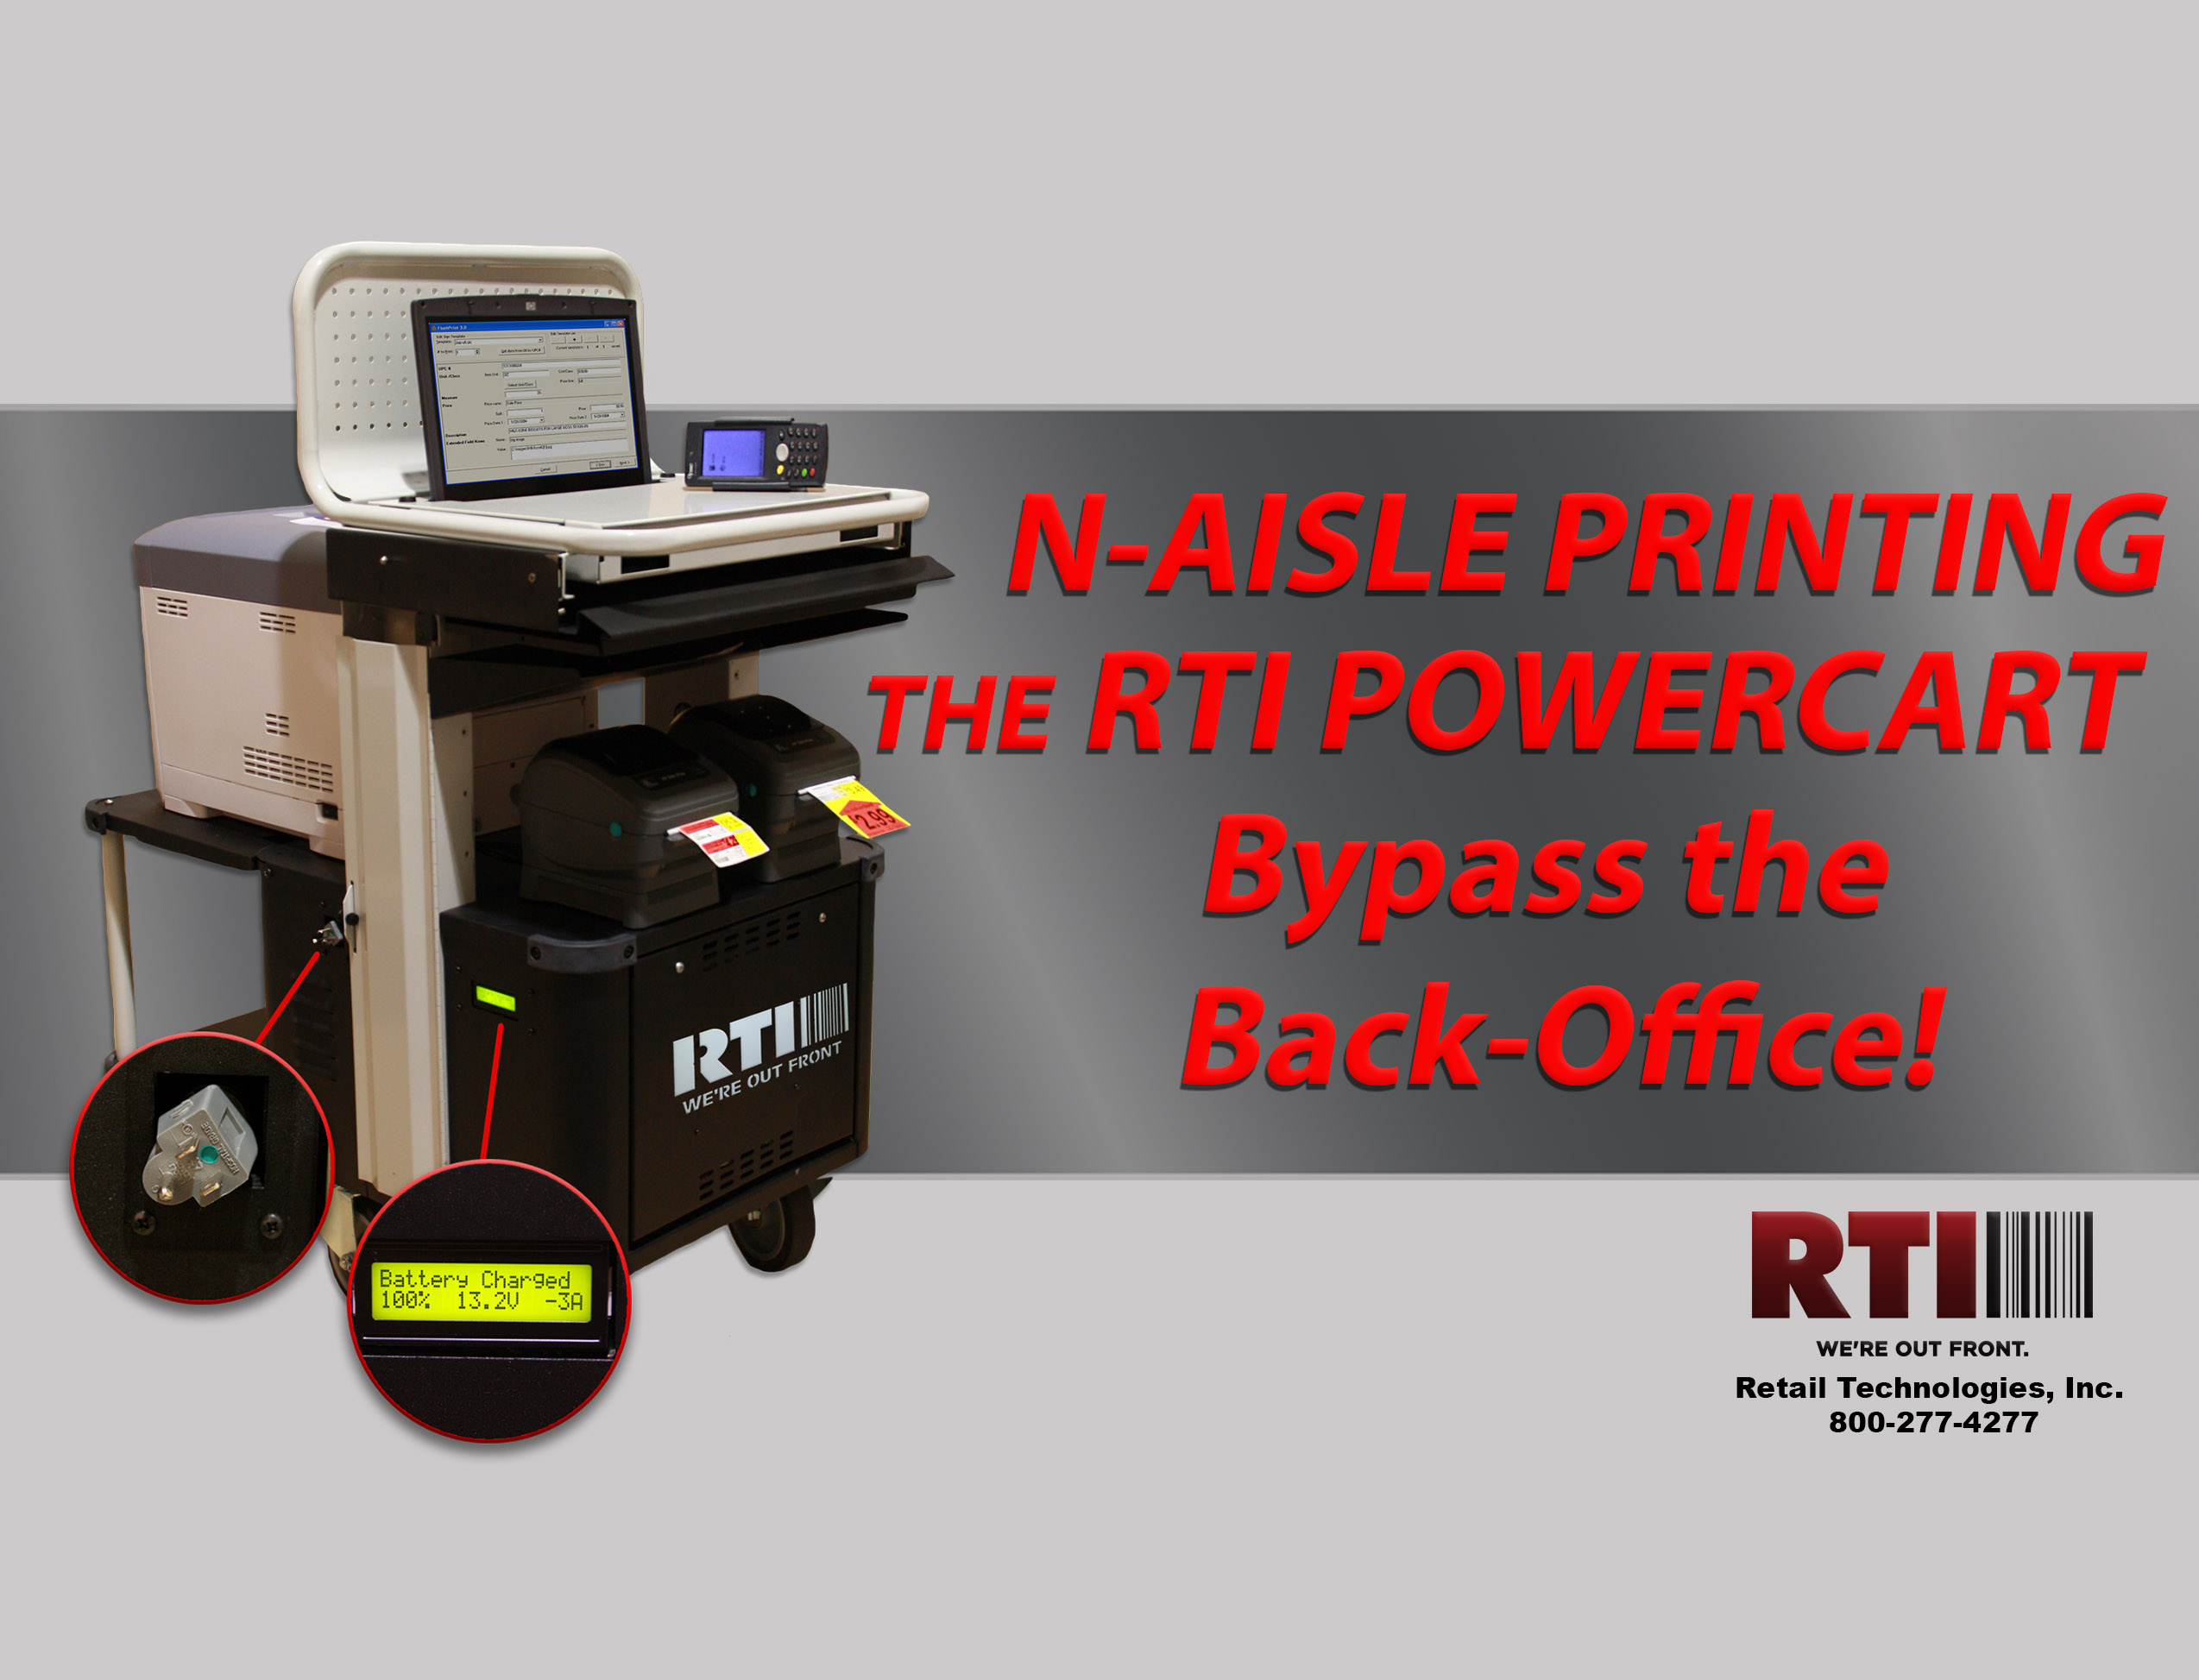 N-Aisle Printing with the RTI Powercart! Bypass the Back Office!